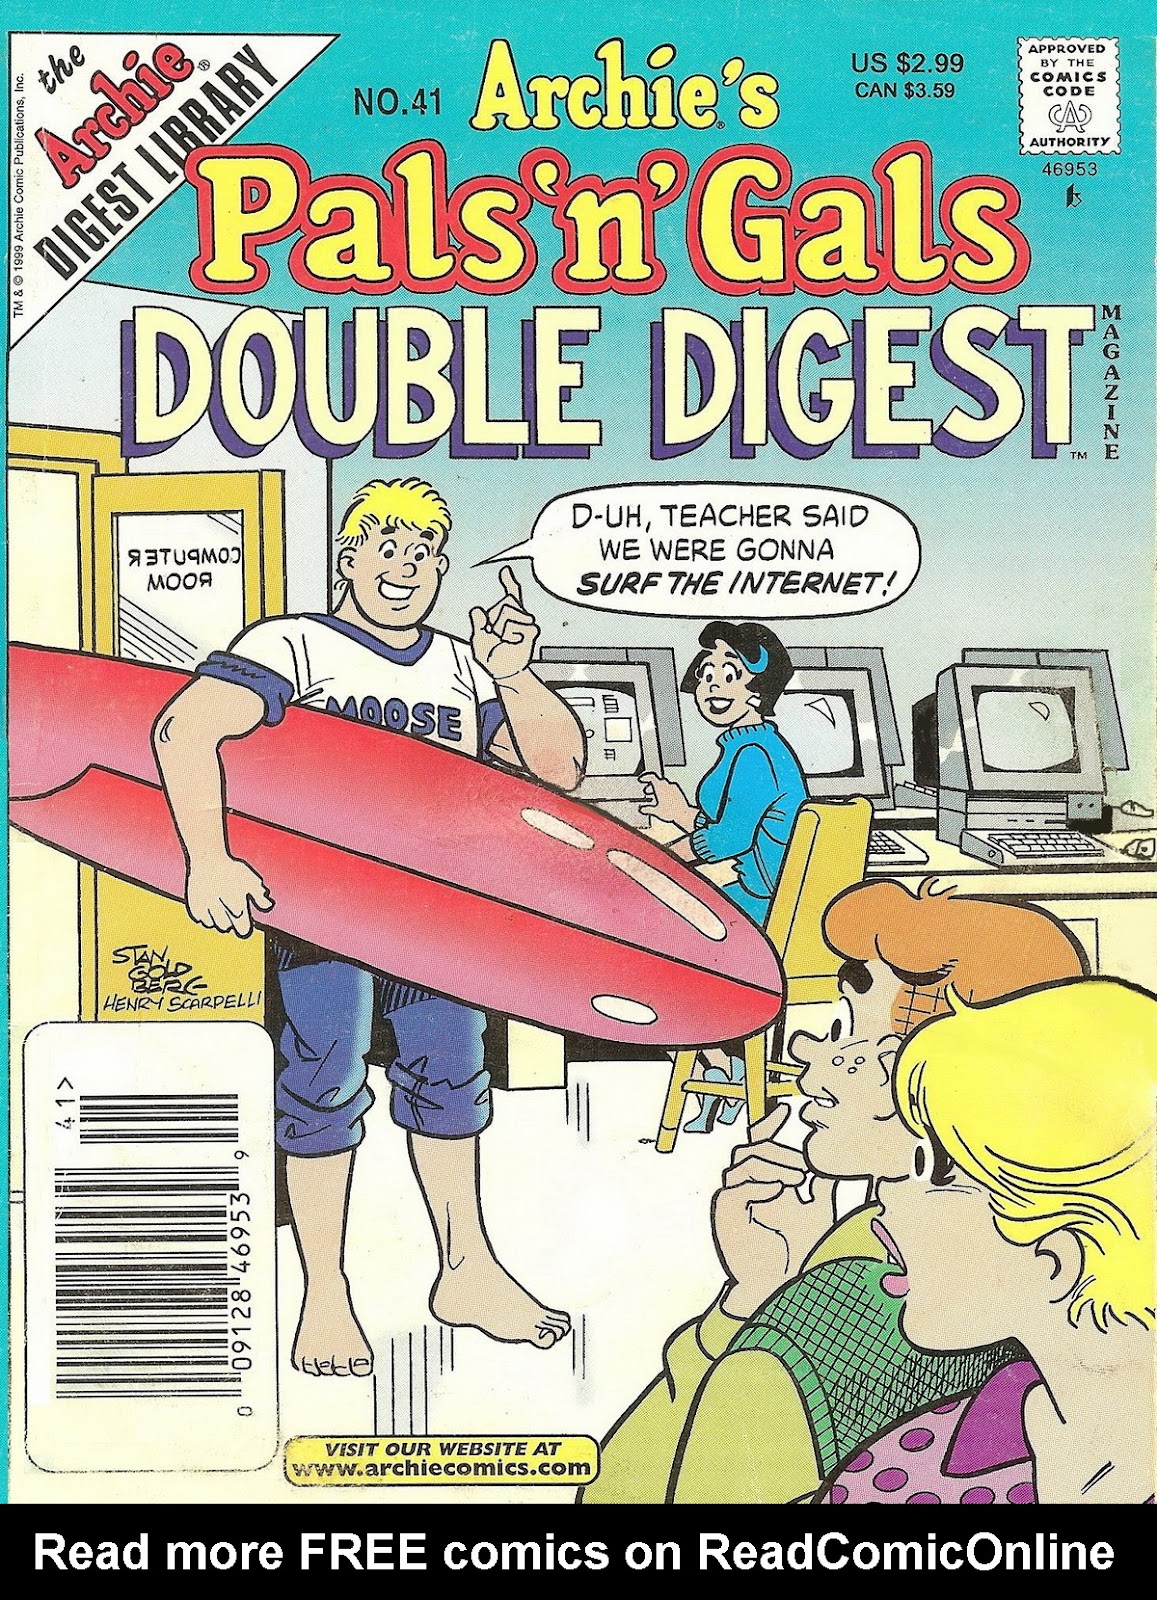 Archie's Pals 'n' Gals Double Digest Magazine issue 41 - Page 1